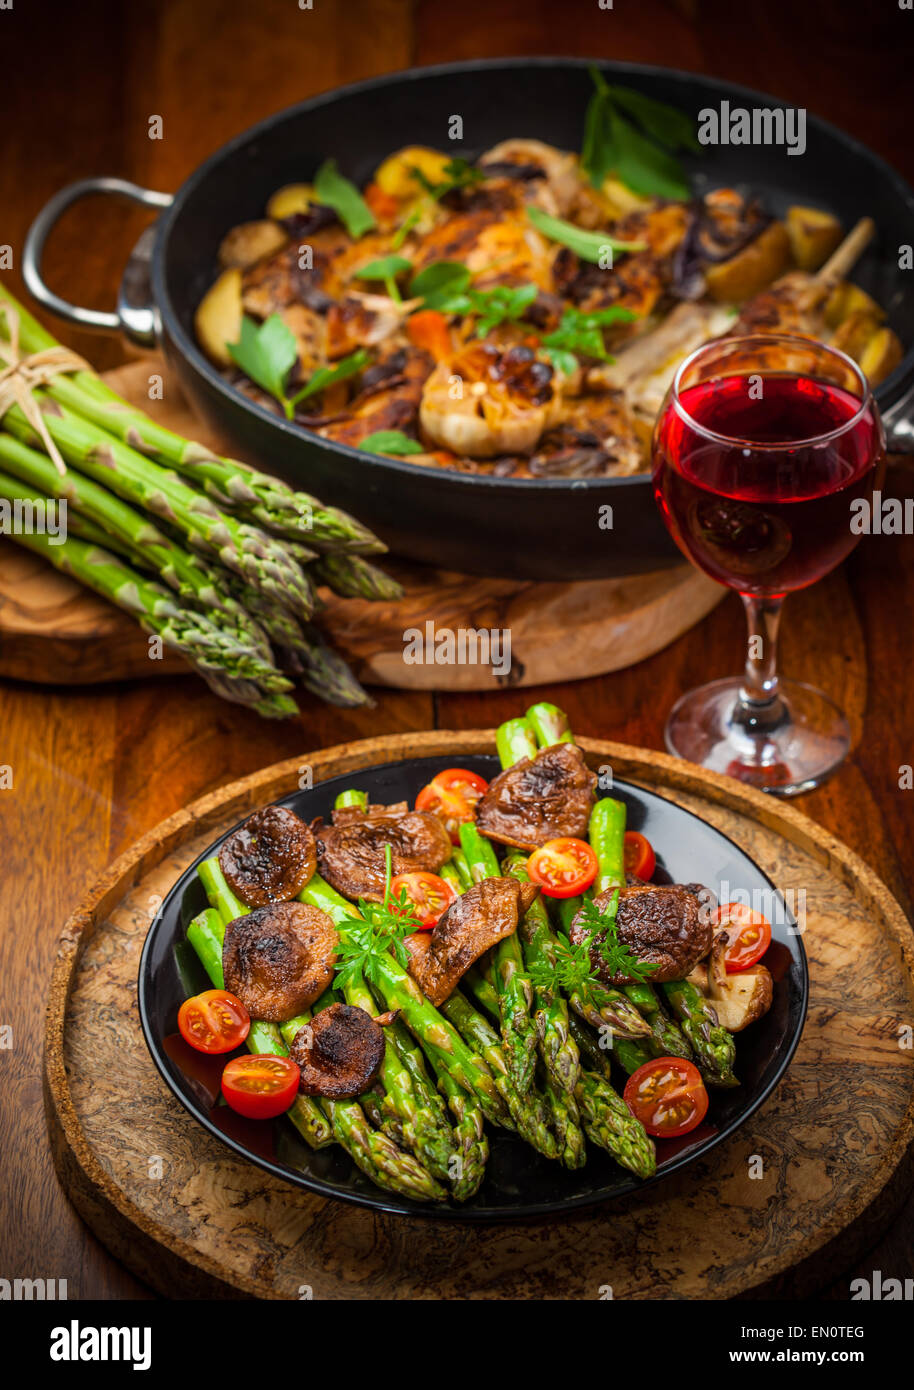 Green asparagus salad with roasted mushrooms and red wine Stock Photo